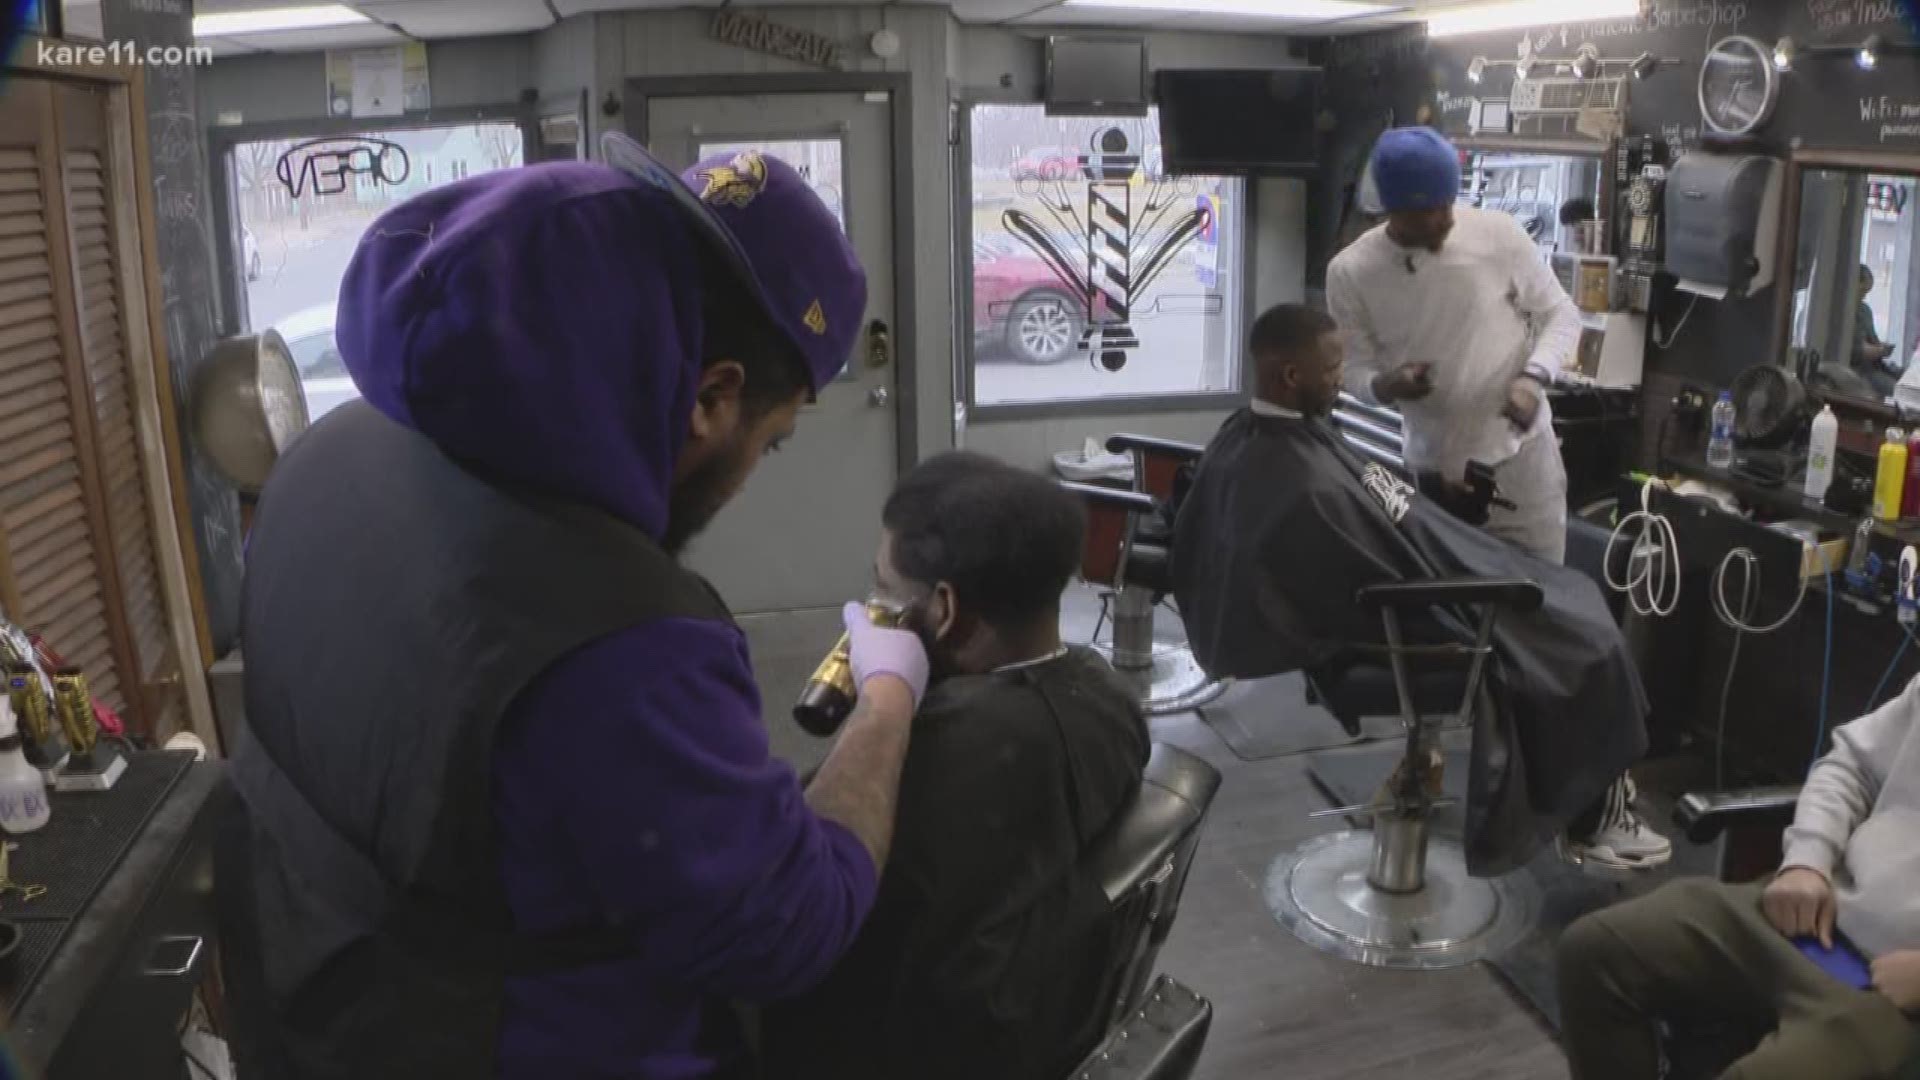 Thousands of Minnesotans are now feeling the financial pinch of the shutdown but barbers in West St. Paul hope they can trim some of the burden.